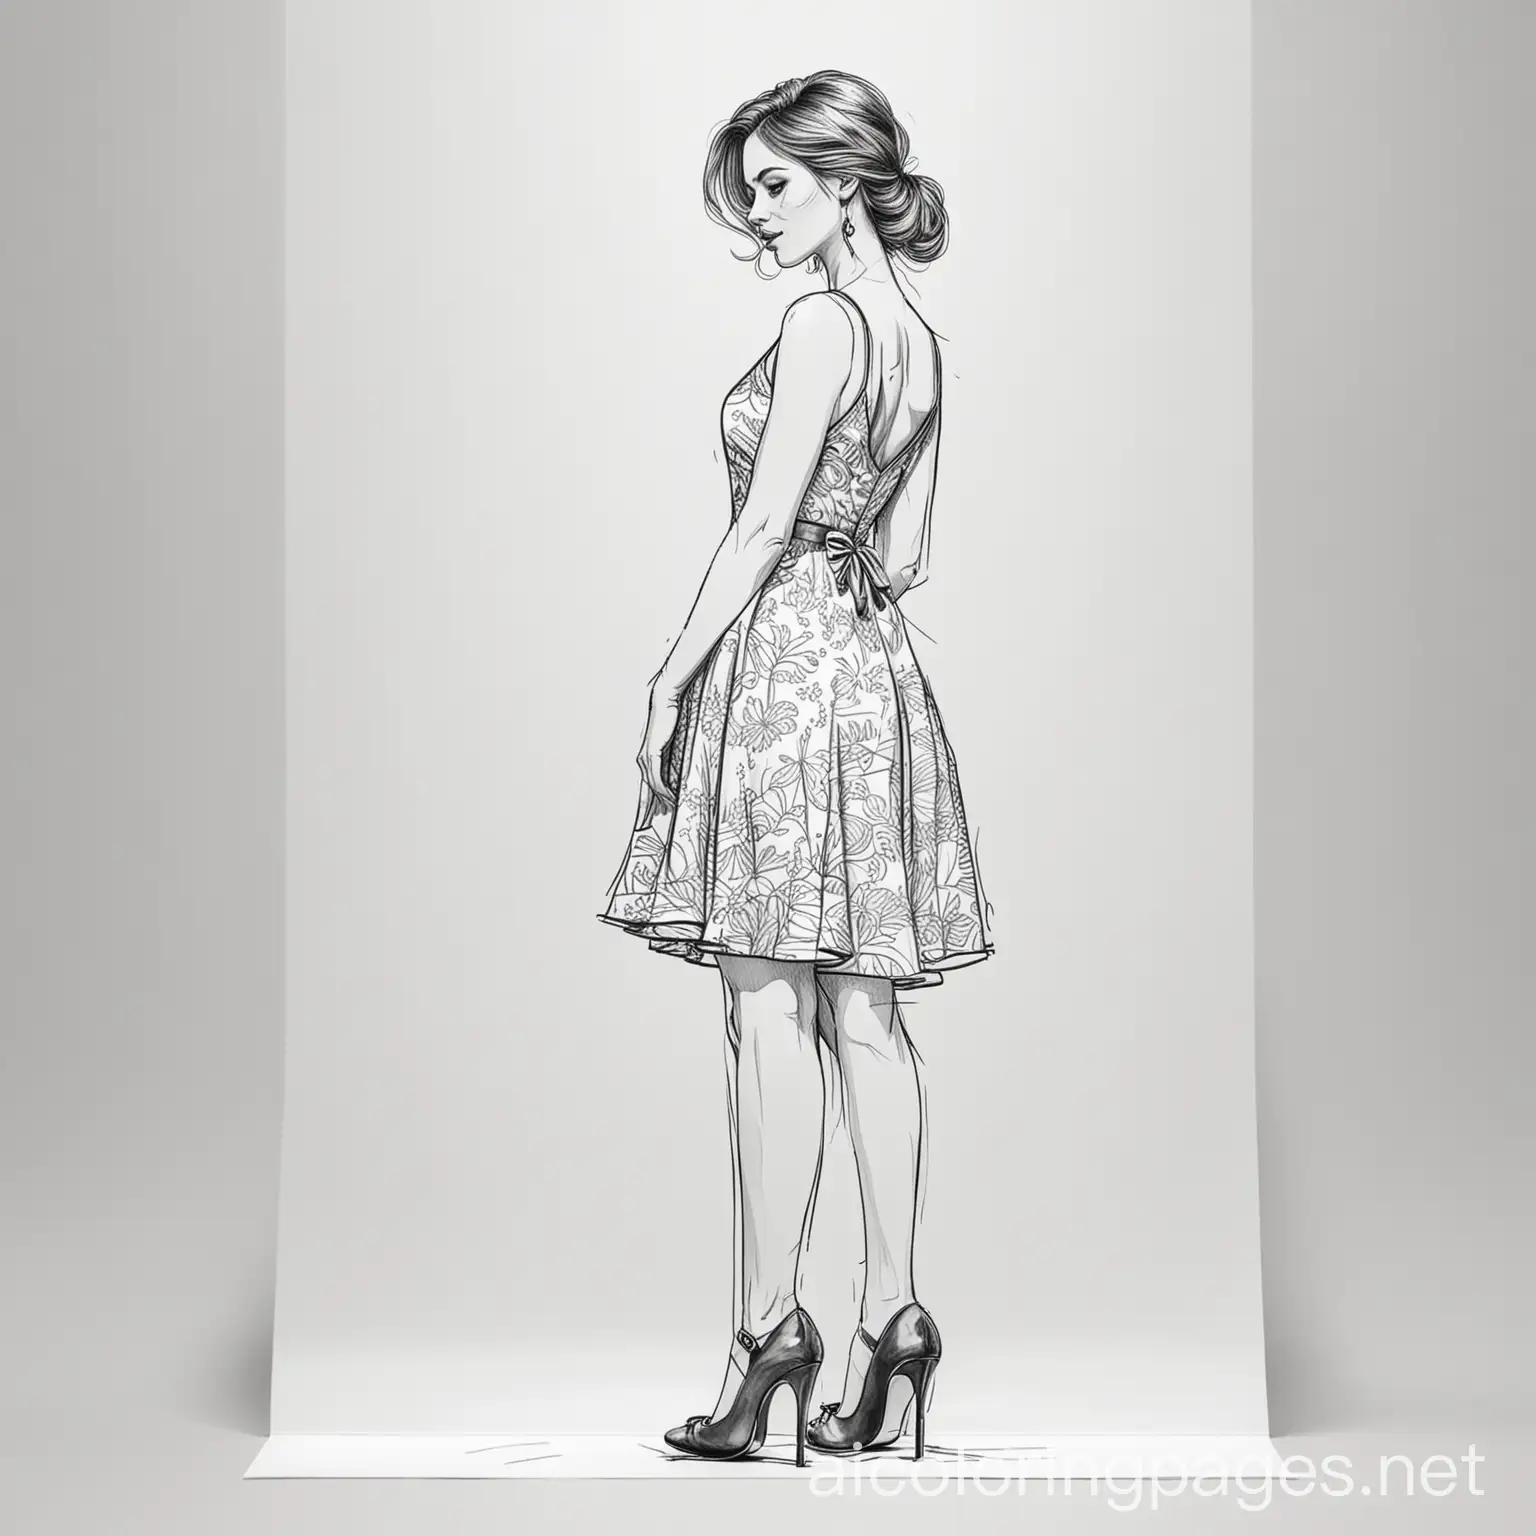 A beautiful woman wearing a dress and high heels standing on a corner , Coloring Page, black and white, line art, white background, Simplicity, Ample White Space.